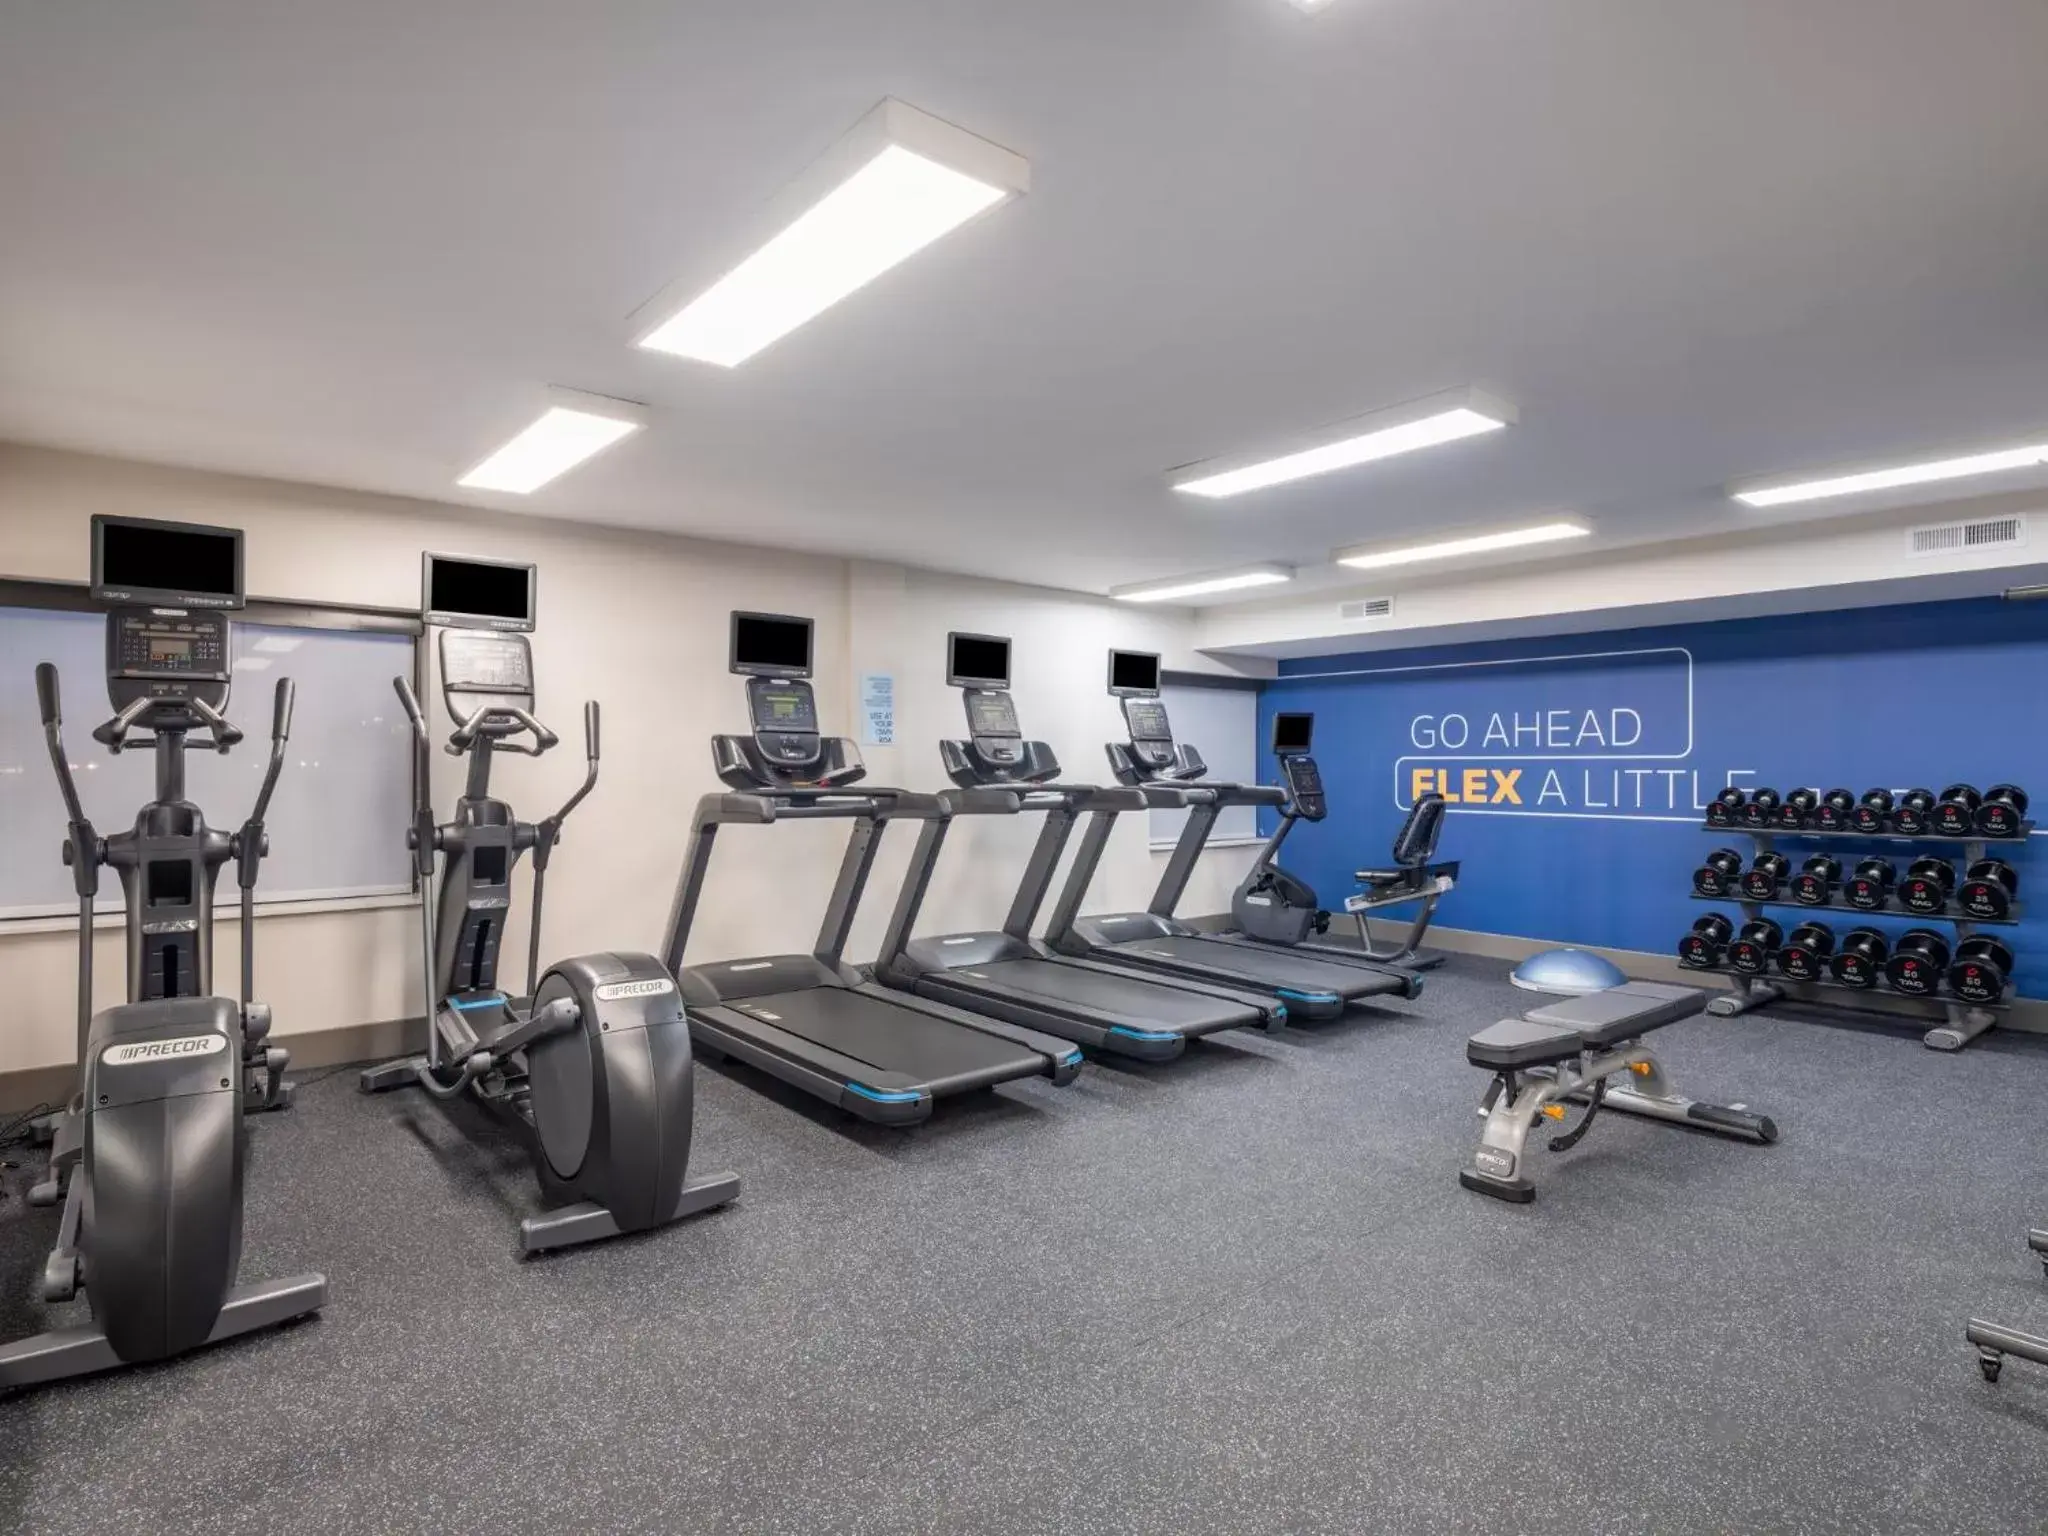 Fitness centre/facilities, Fitness Center/Facilities in Holiday Inn Express & Suites Greensboro - I-40 atWendover, an IHG Hotel